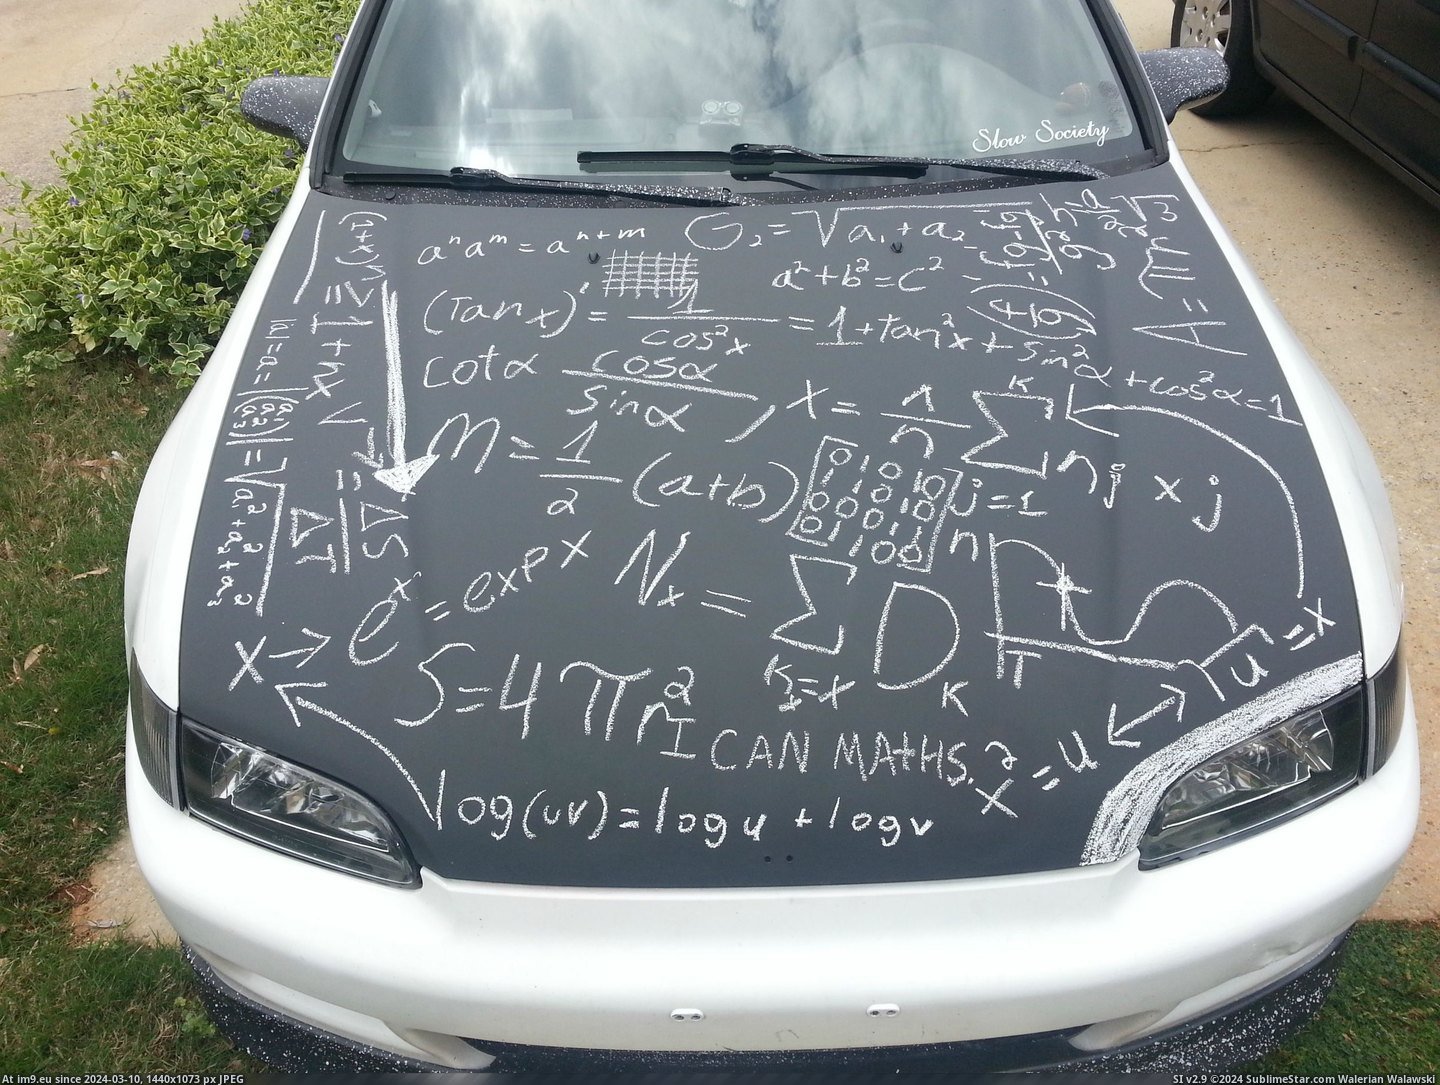 #Part #For #Love #Edition #Hood #Minute #Deux #Repairs #Paint #Chalkboard #Painted #Drawing [Pics] I painted my hood in chalkboard paint and love every minute drawing on it! Part Deux, in for repairs edition. 11 Pic. (Image of album My r/PICS favs))